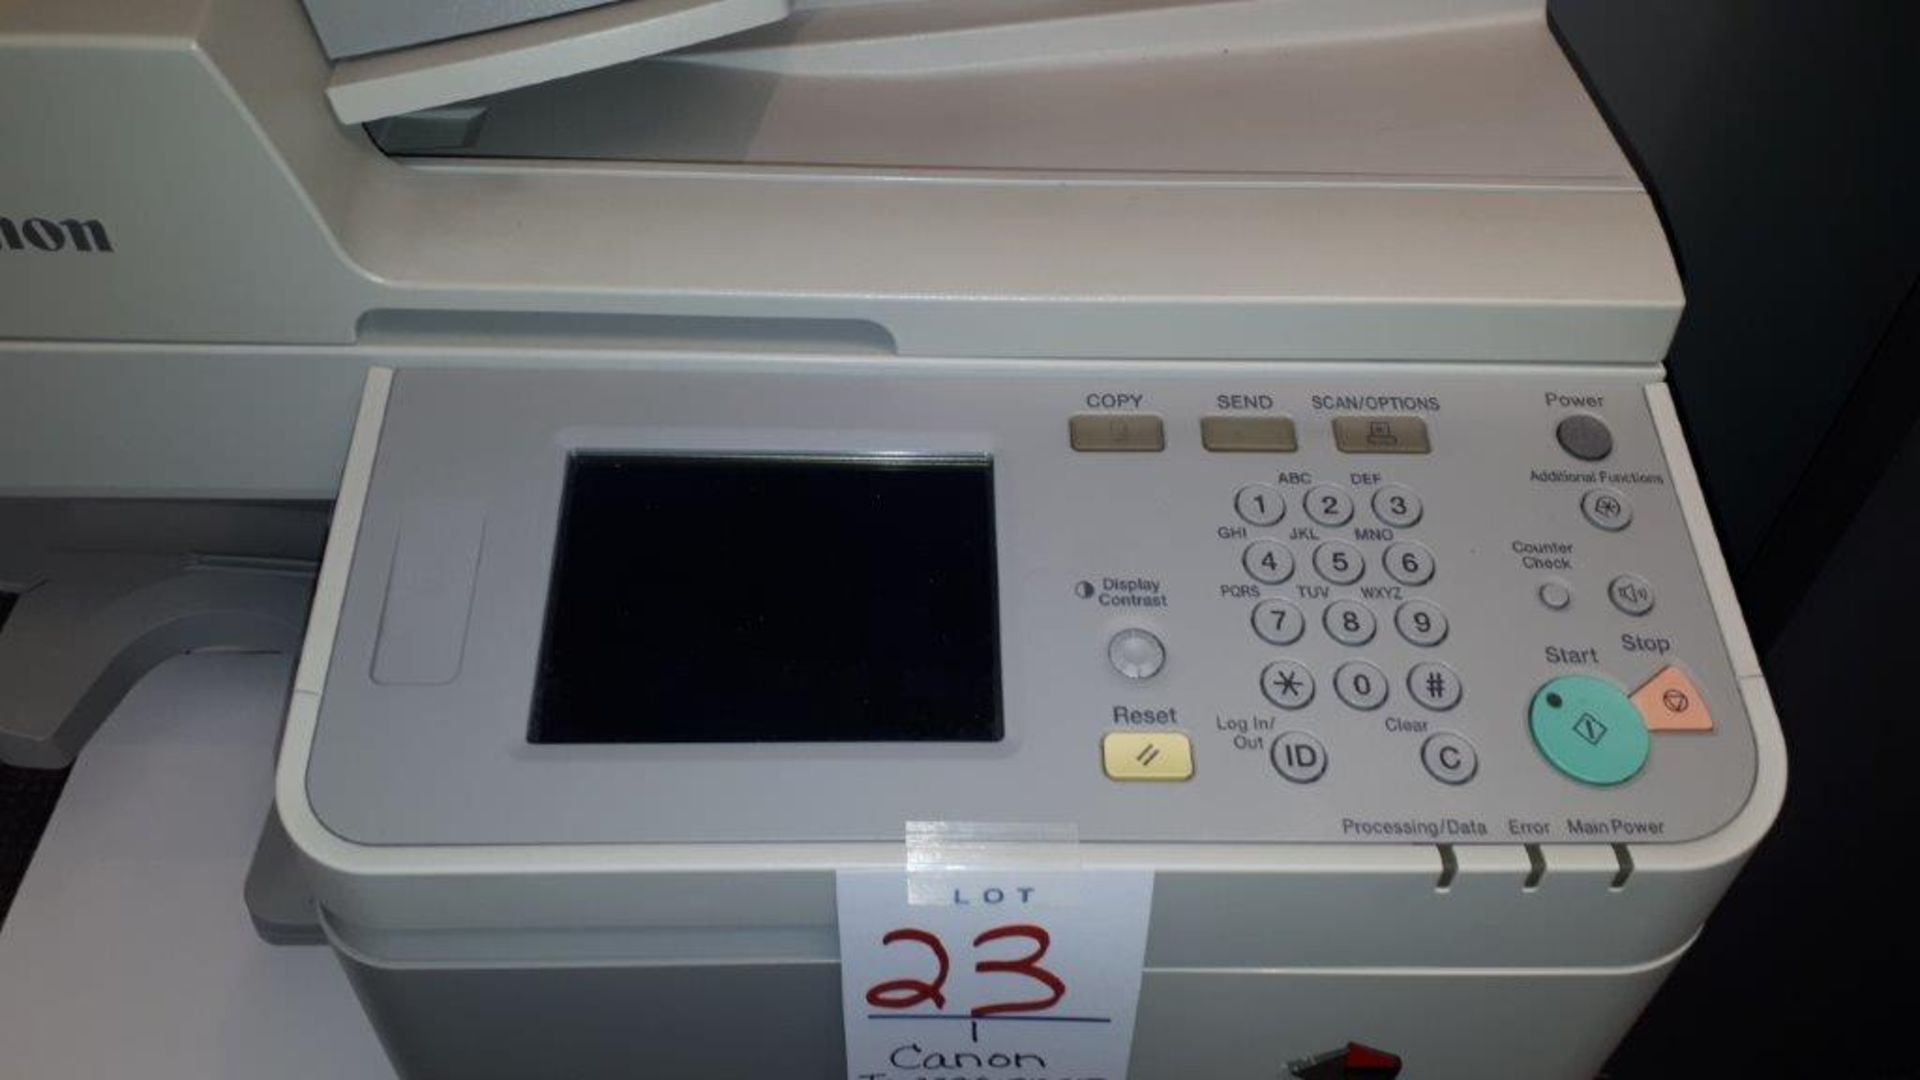 Canon Imagerunner 2530 photocopier - Image 2 of 5